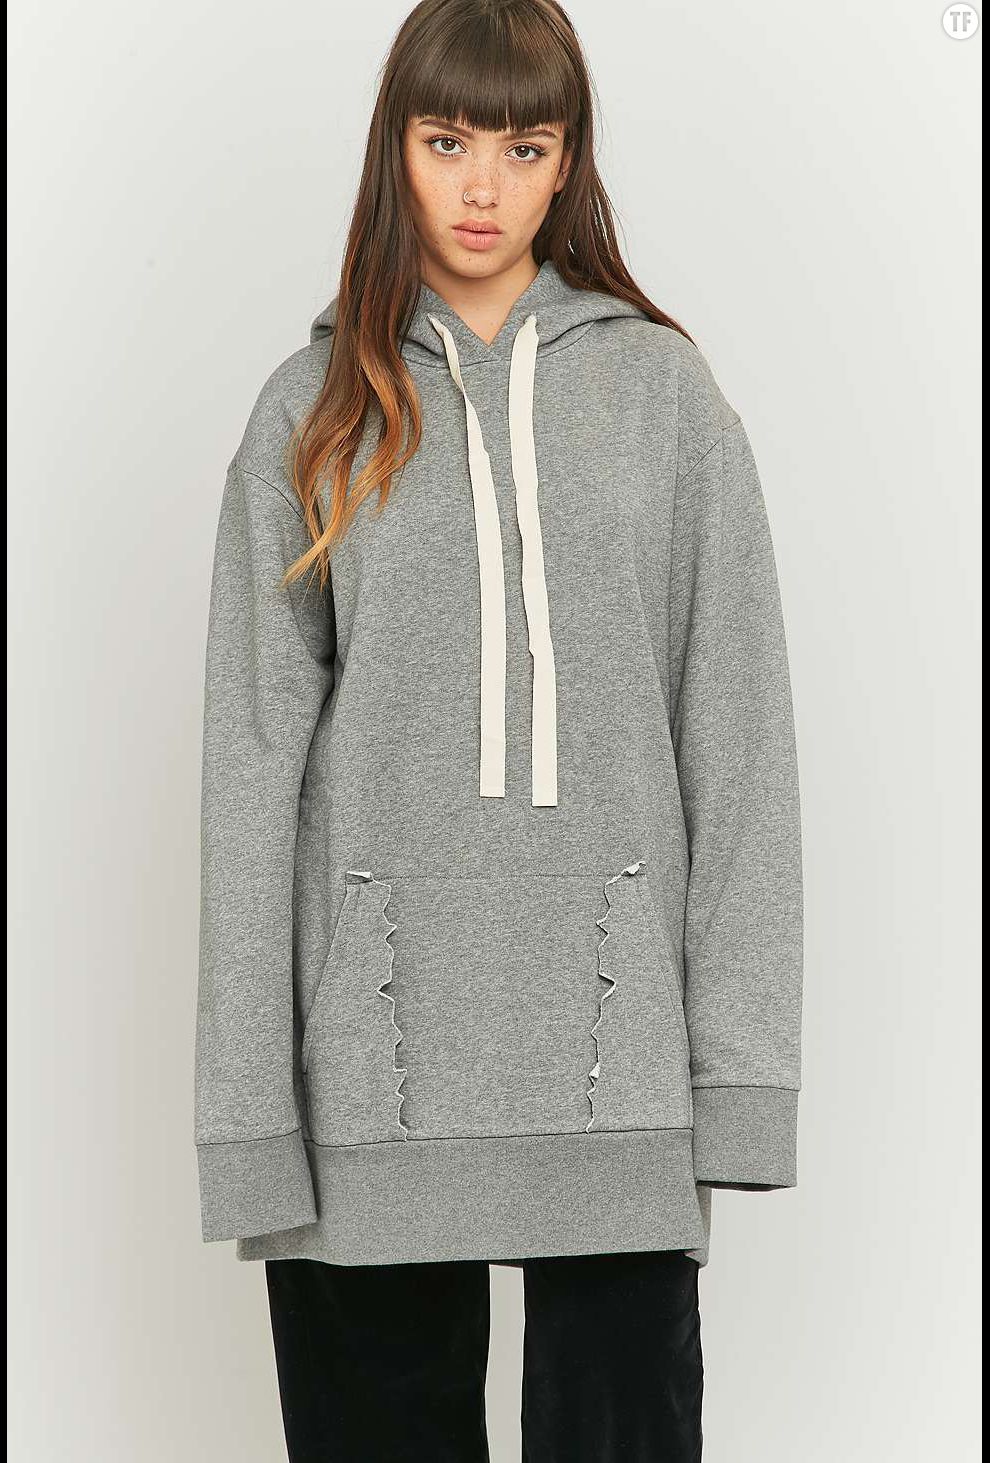  Sweat-shirt MM6 sur Urban Outfitters, 275€ 